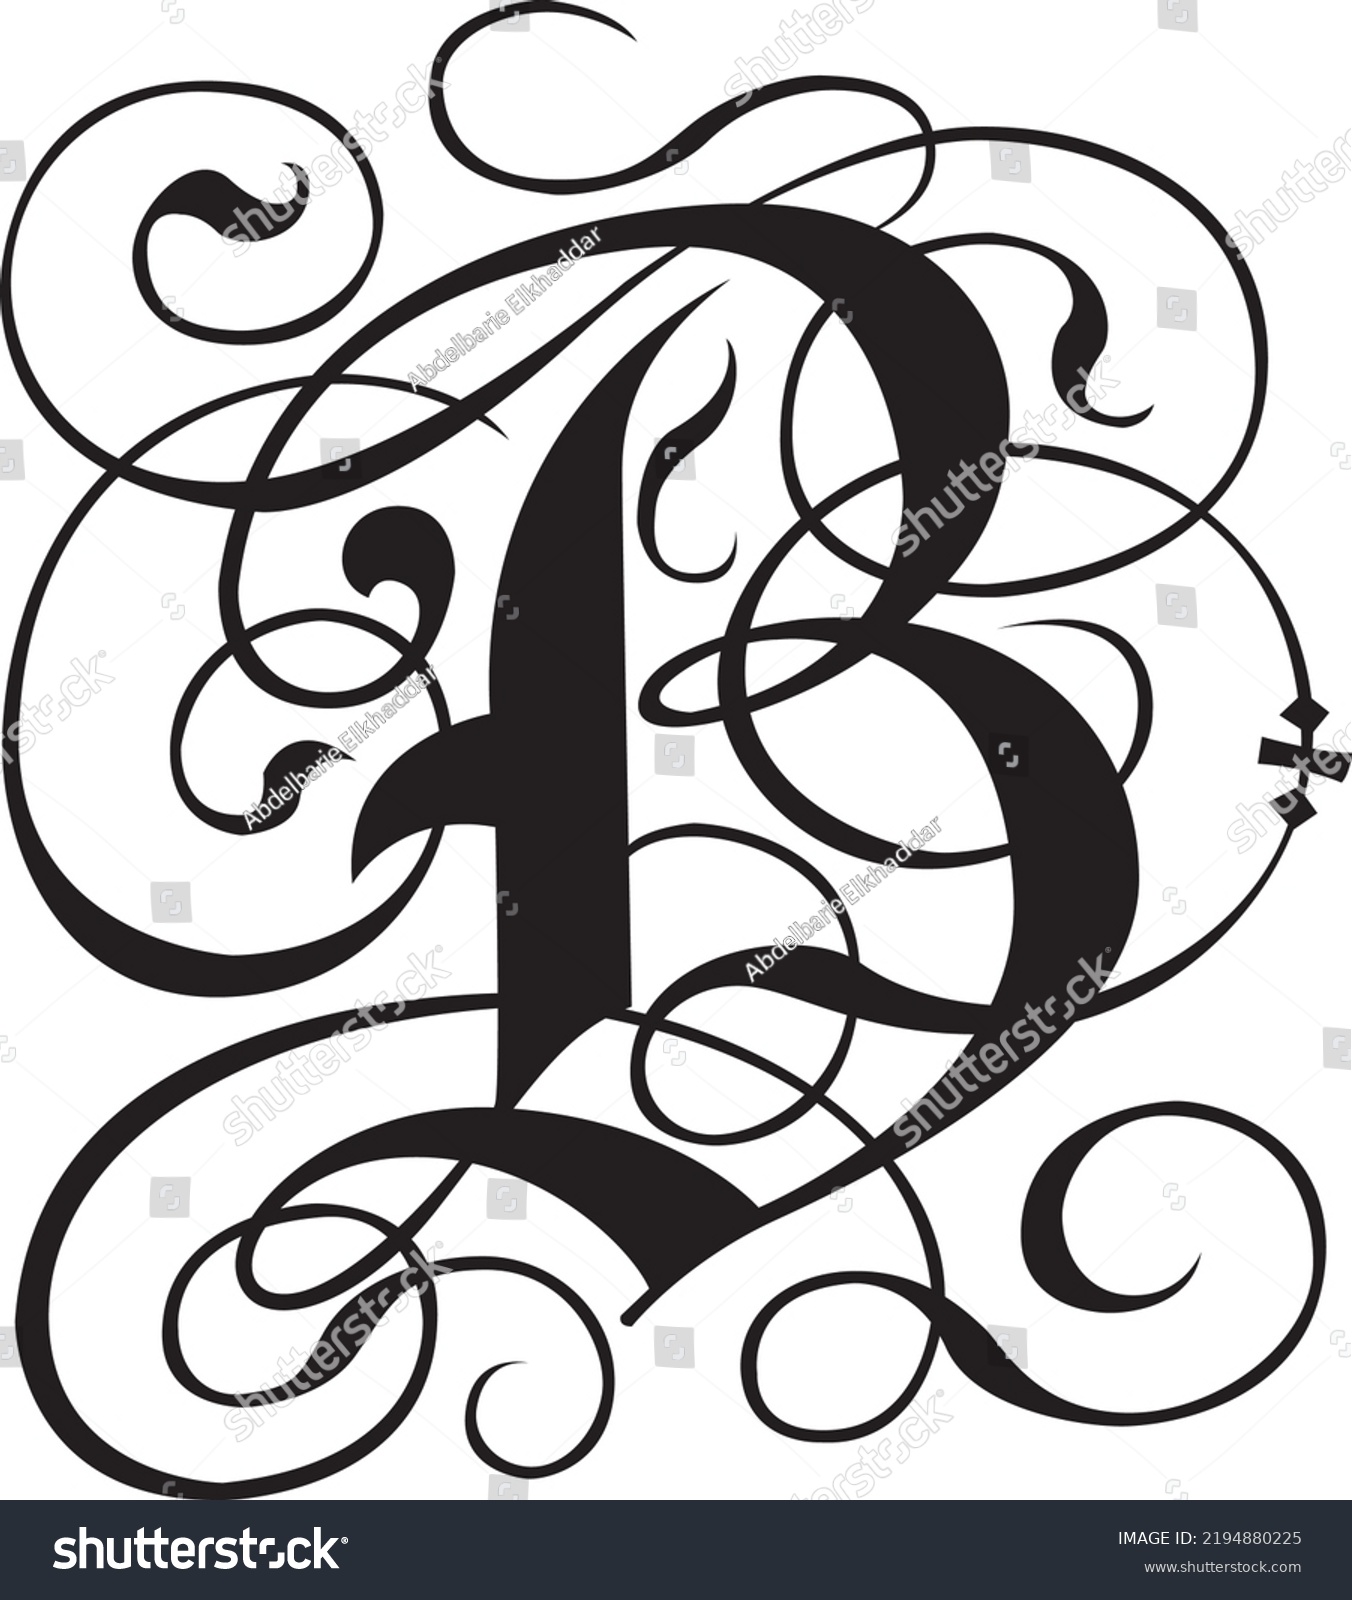 Gothic Letter B Scroll Design Black Stock Vector (Royalty Free ...